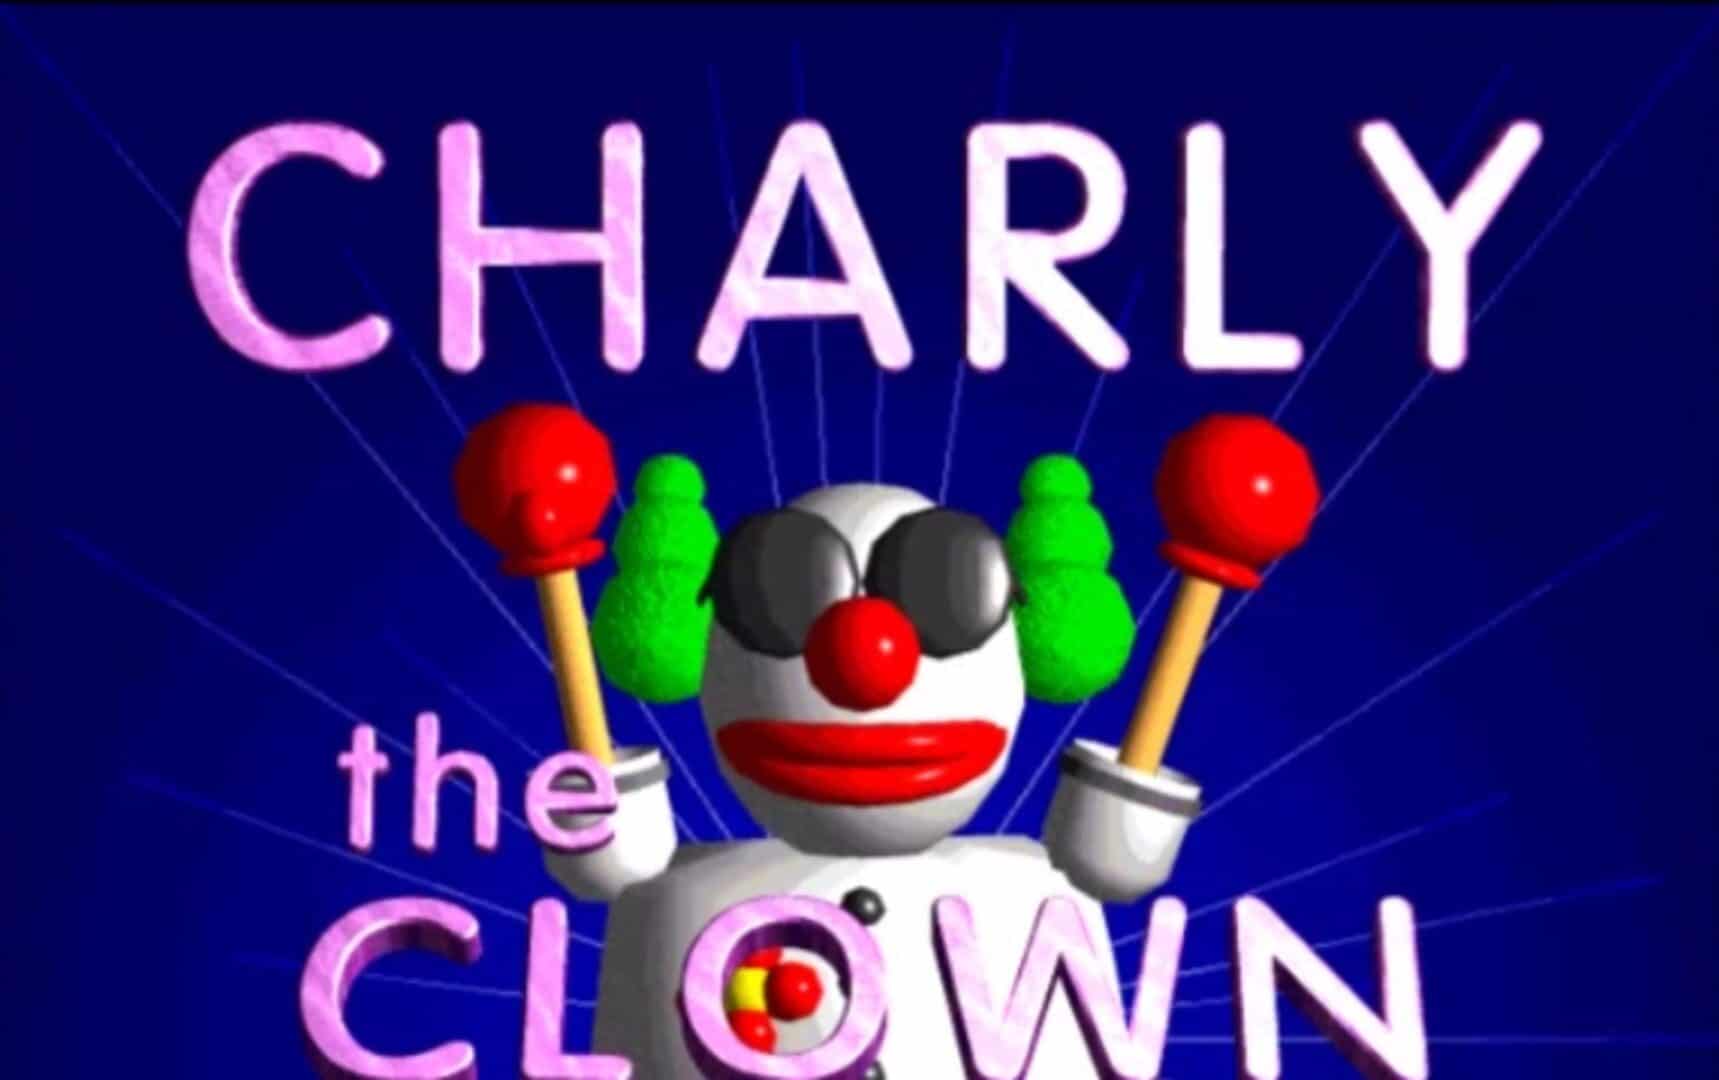 Charly the Clown